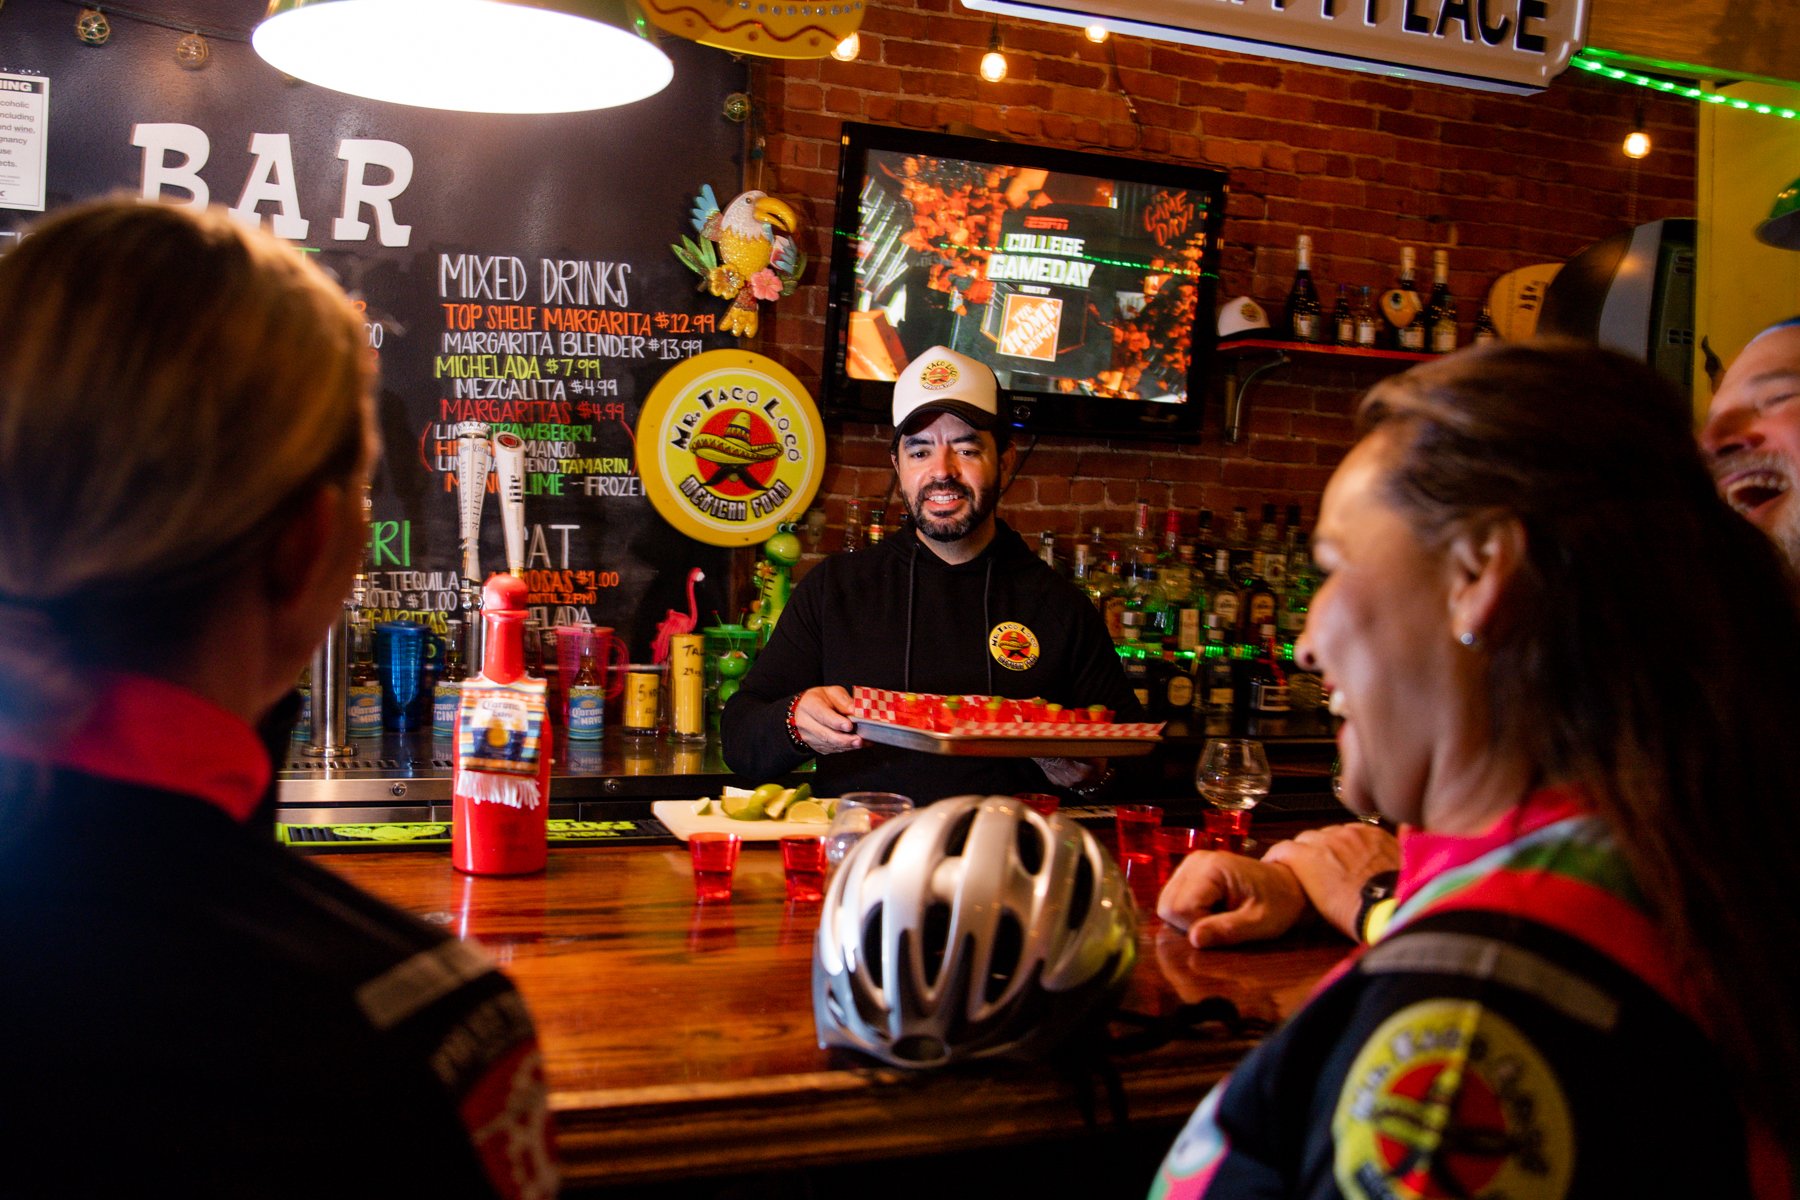 Tuesdays are meant for tacos and bike rides. 🌮🚴

Join the Springdale Bike Club for their Taco Tuesday rides. The ride starts at Phat Tire Bike shop at 7PM. After the ride, swing by Mr. Taco Loco for .99 cent tacos!

#downtownspringdale #springdalea